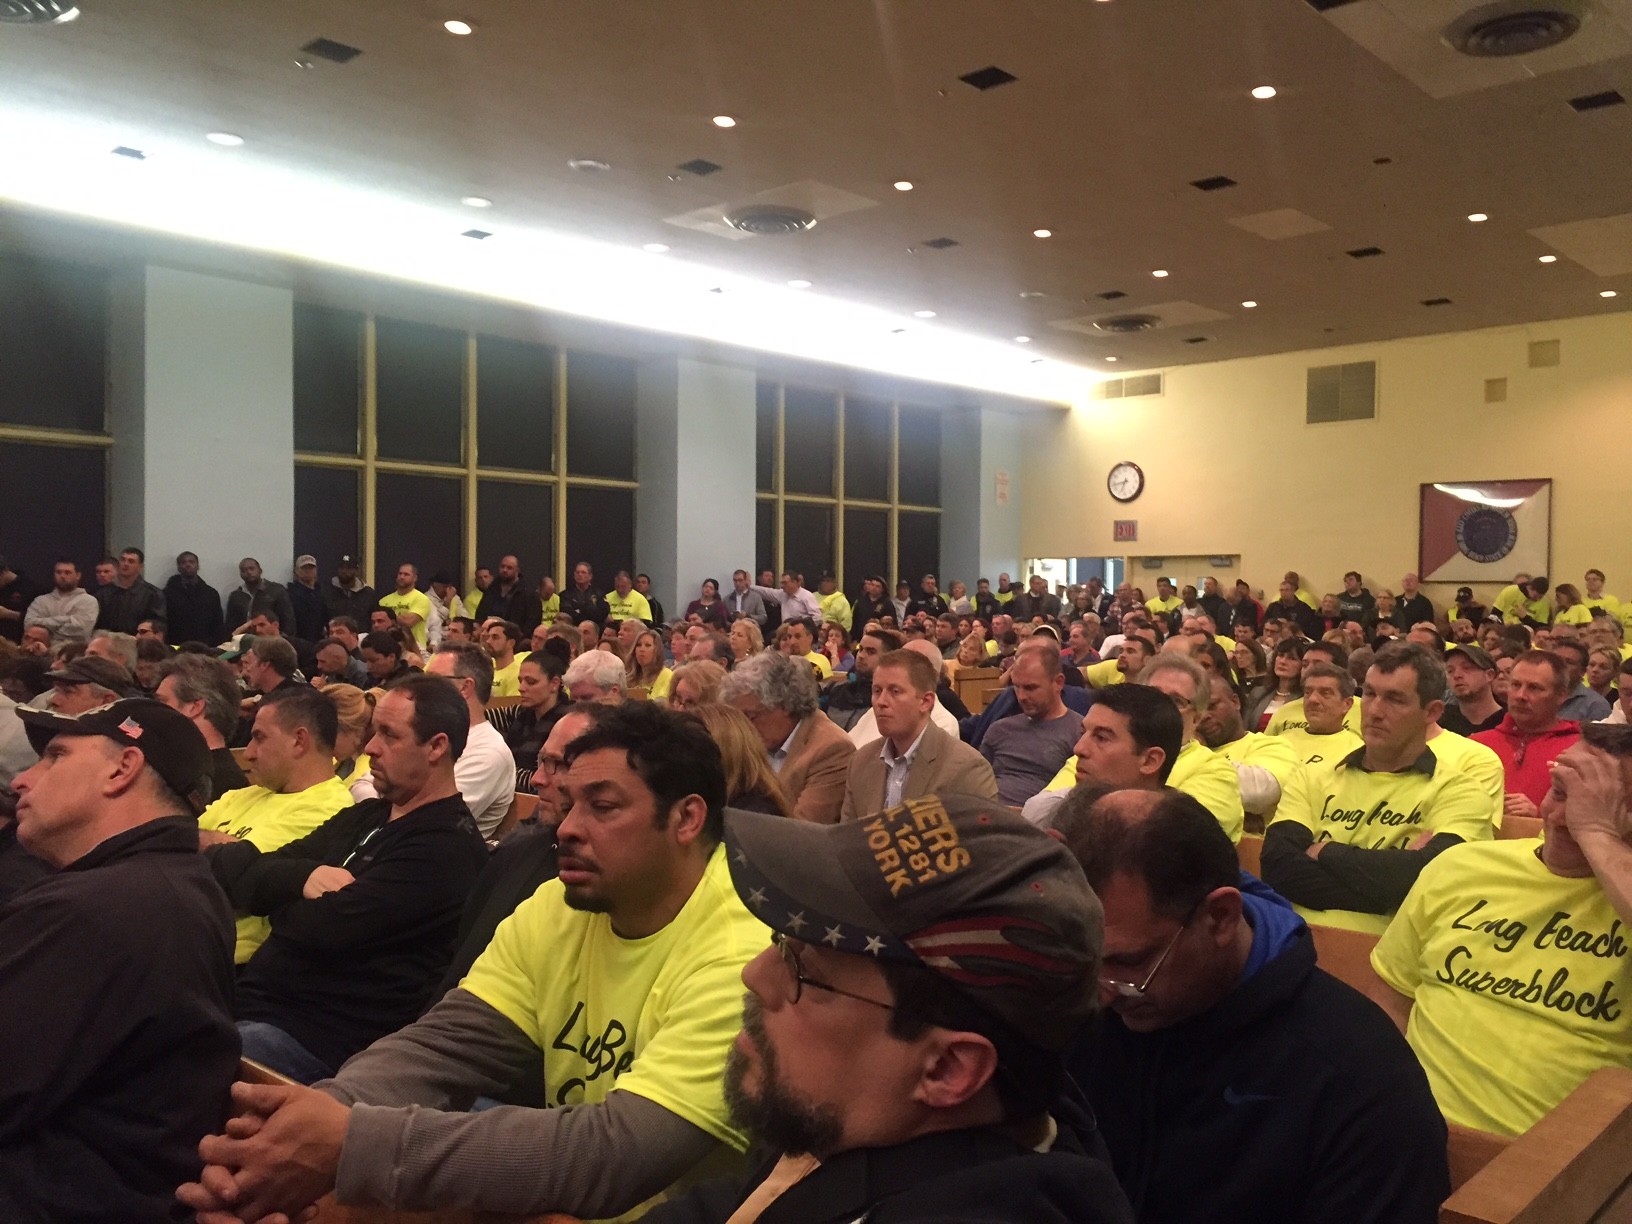 The sixth-floor auditorium of City Hall was filled to its 415-person limit, though officials said that a total of 700 and 800 people attended throughout the night. The Nassau County Fire Marshal was on hand to make sure the room never exceeded capacity, officials said.